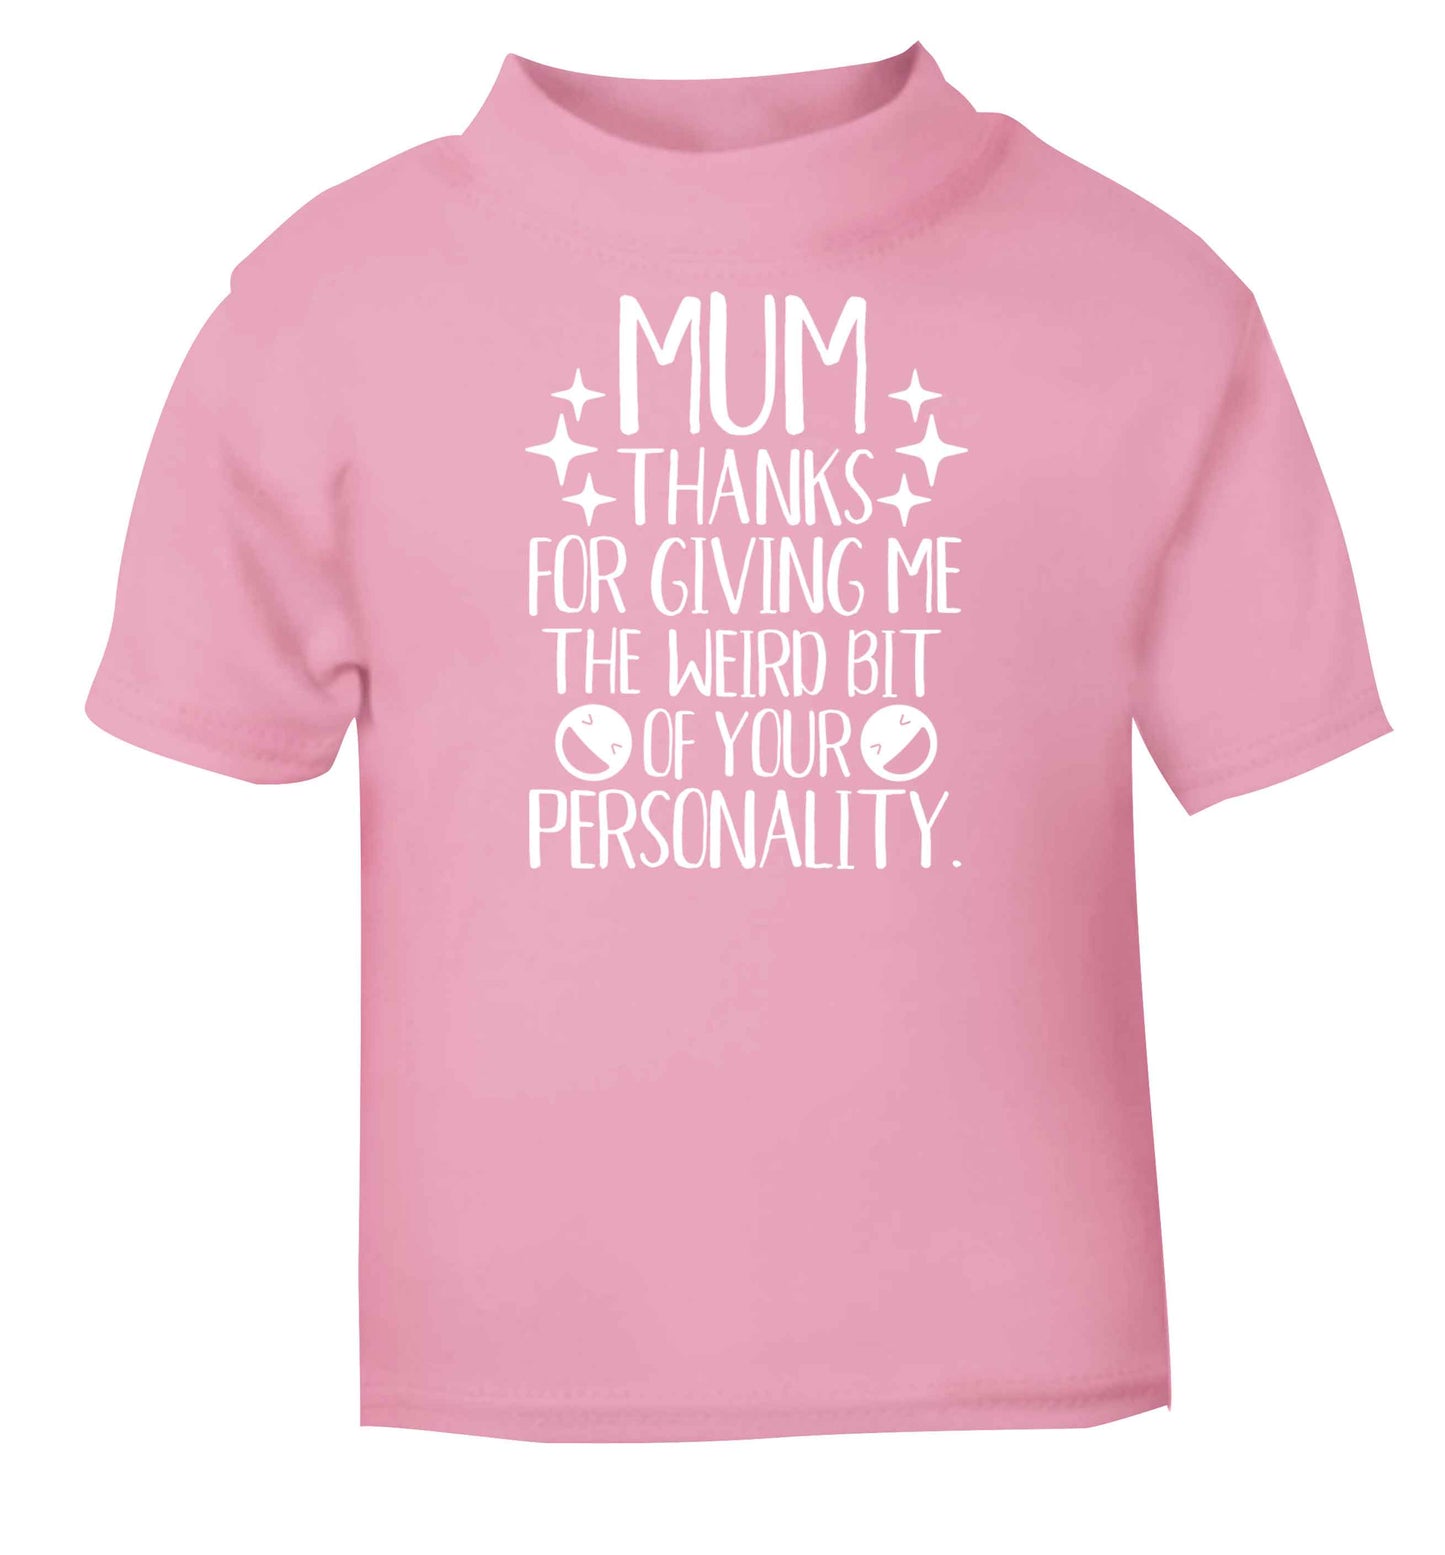 Mum thanks for giving me the weird bit of your personality light pink baby toddler Tshirt 2 Years